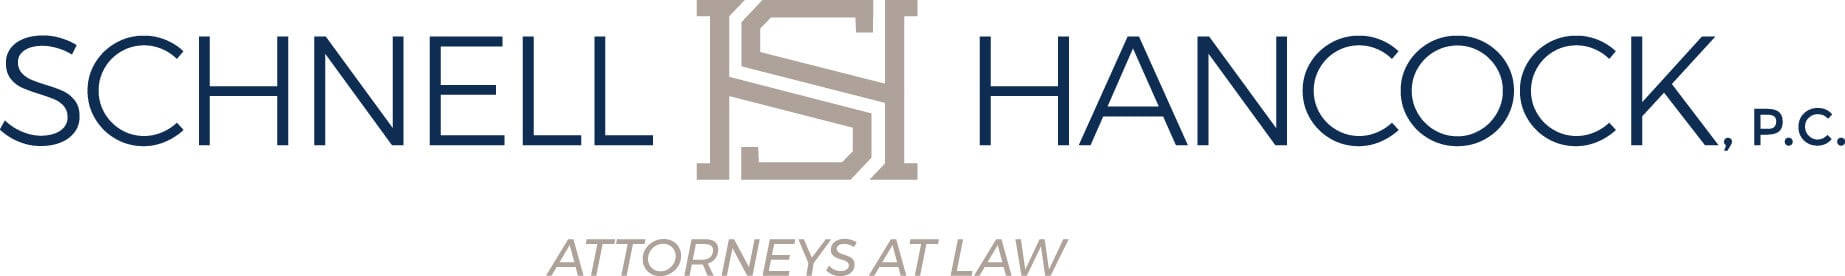 Schnell Hancock, P.C. | Attorneys At Law